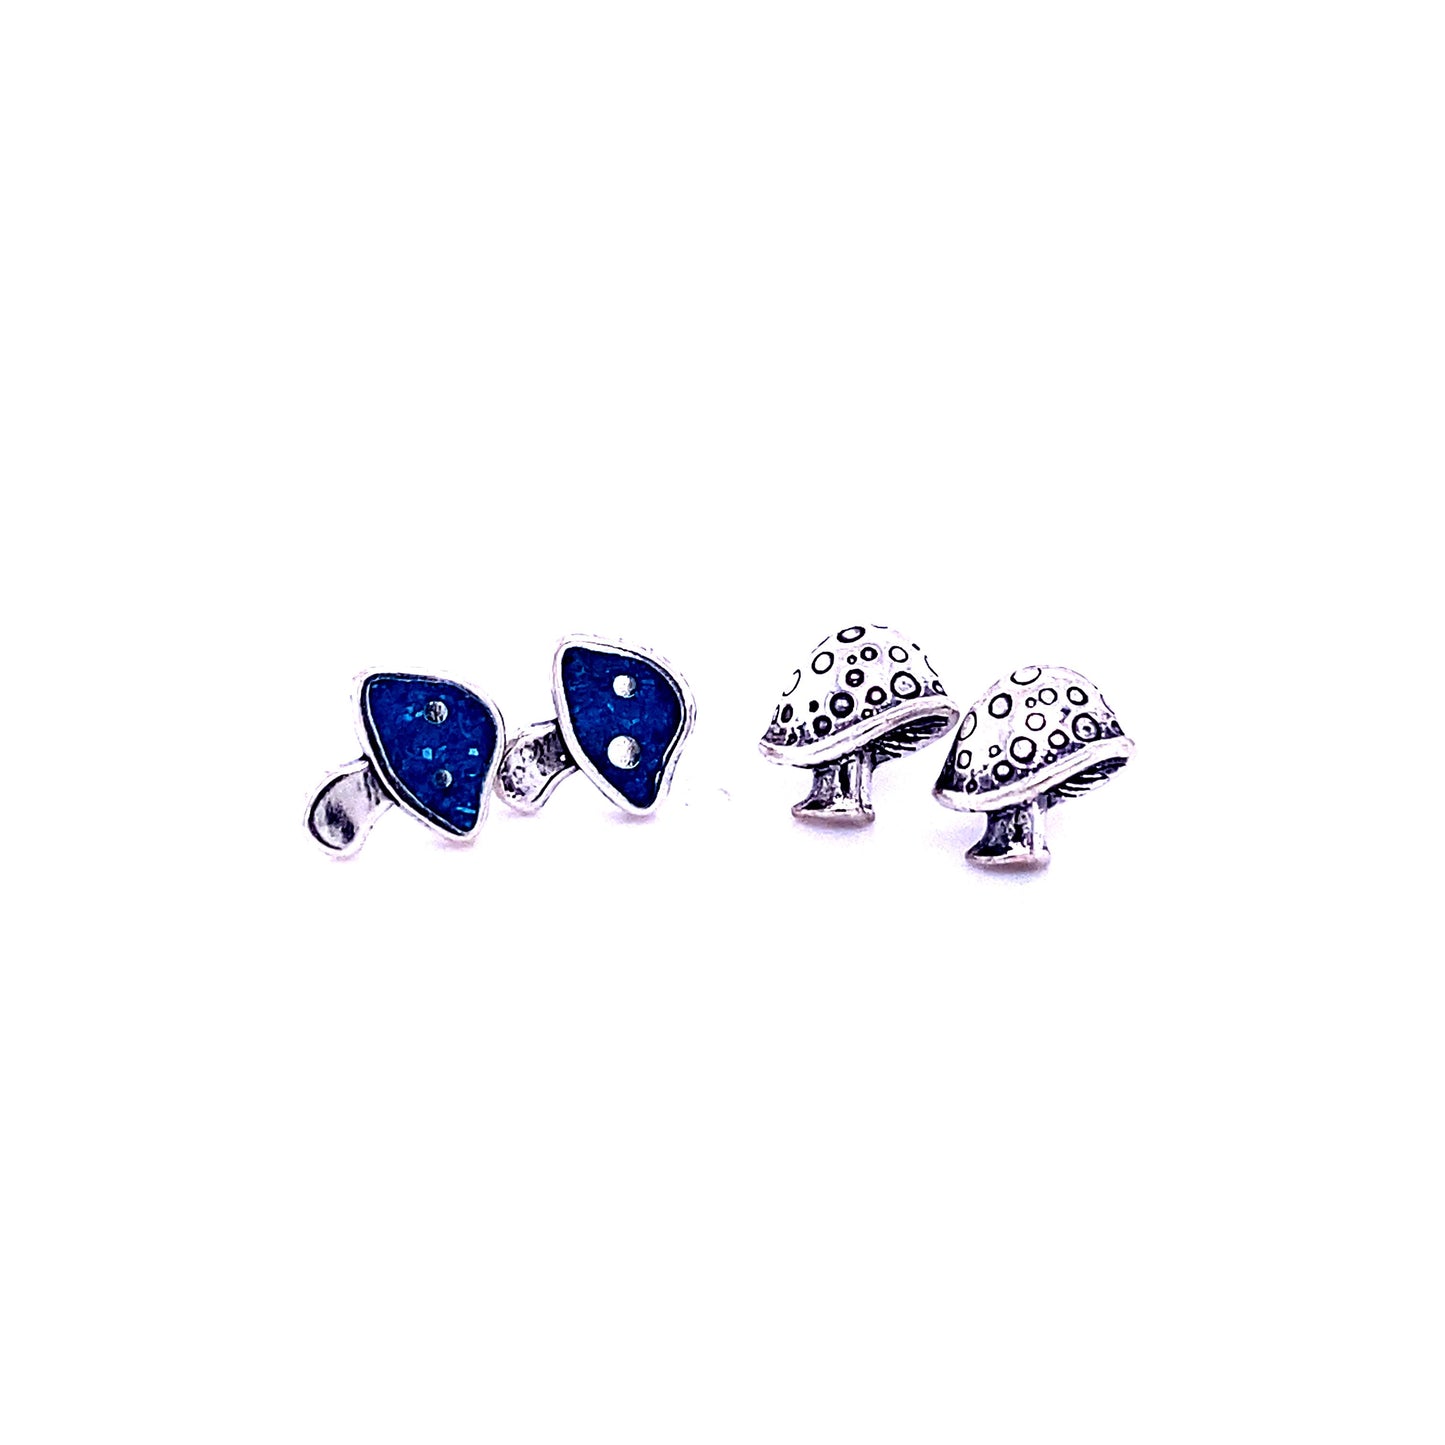 A pair of Mushroom Stud Earrings from Super Silver with blue stones.